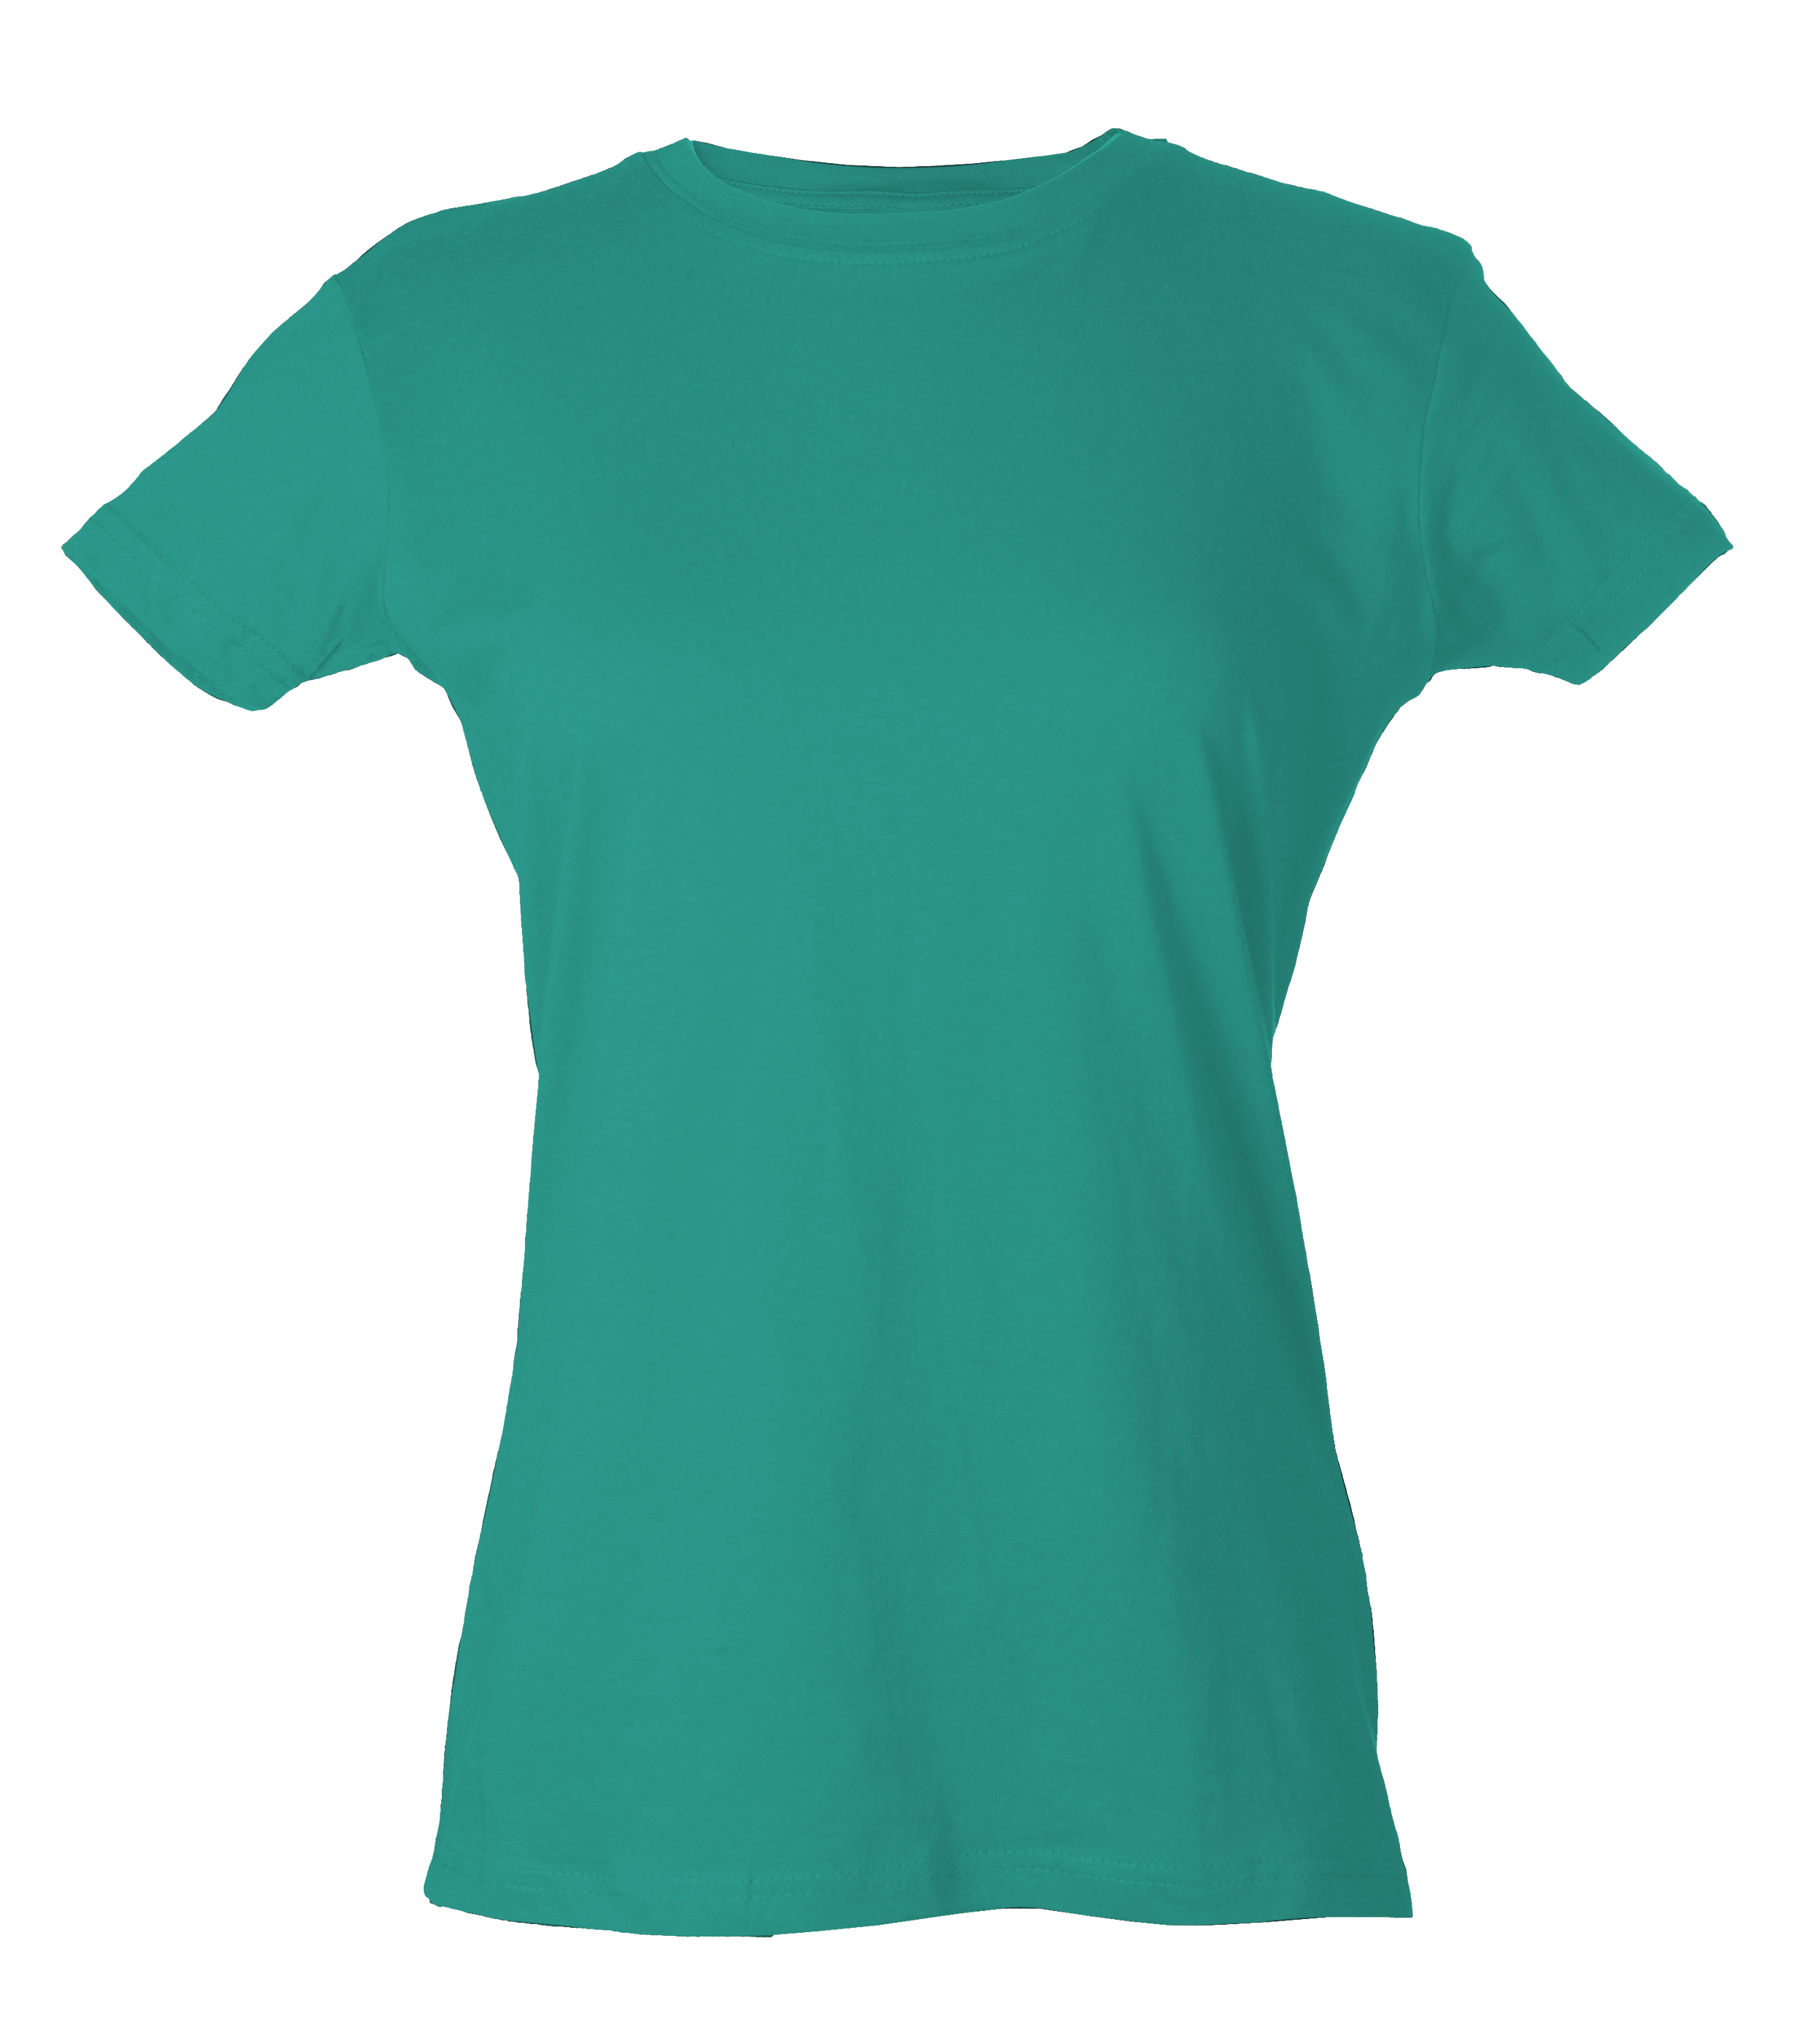 0213TC_front_Teal_HR - Friendly Arctic Printing